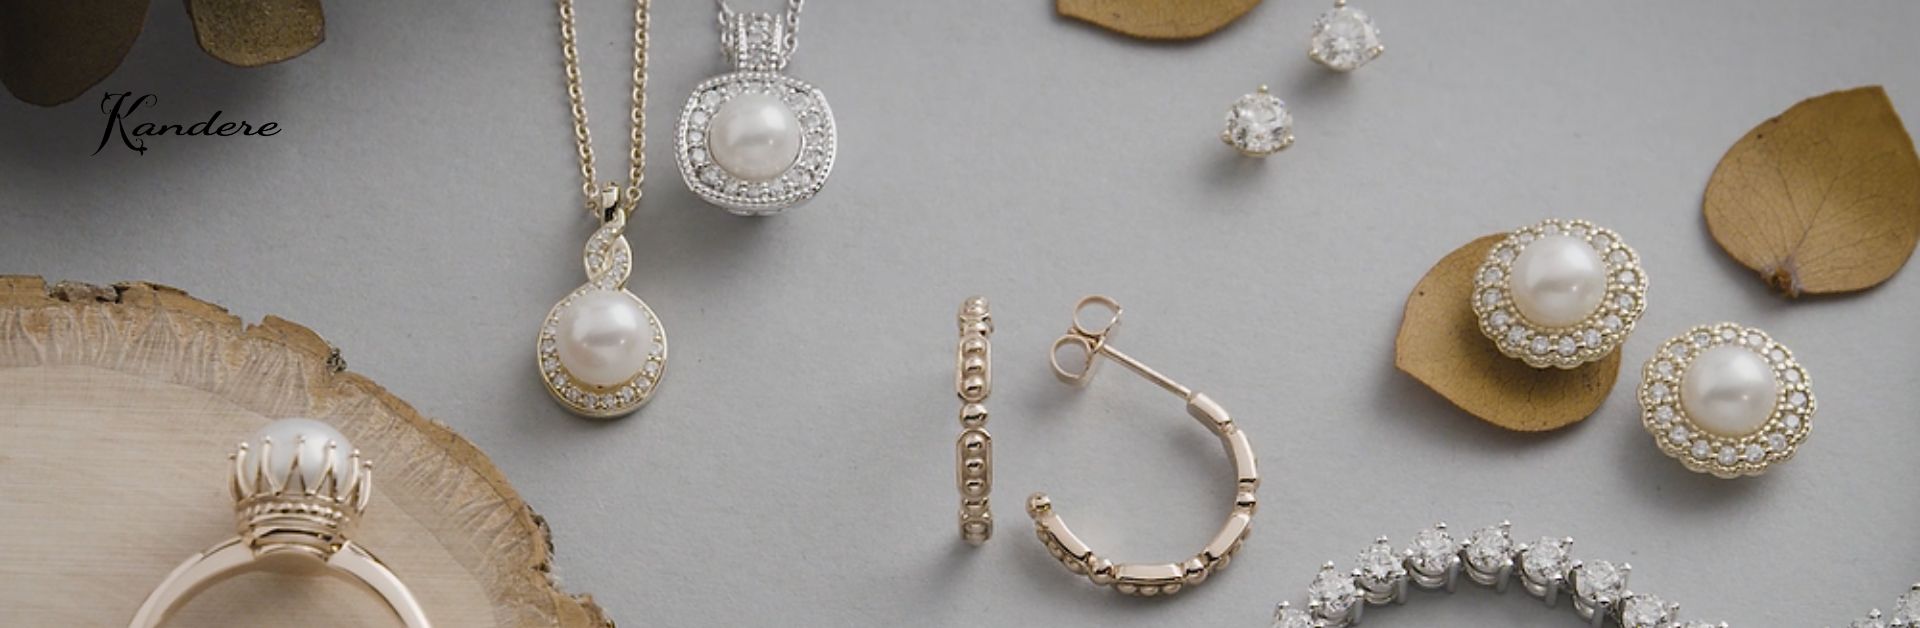 Hottest Jewelry Trends for this Holiday Season